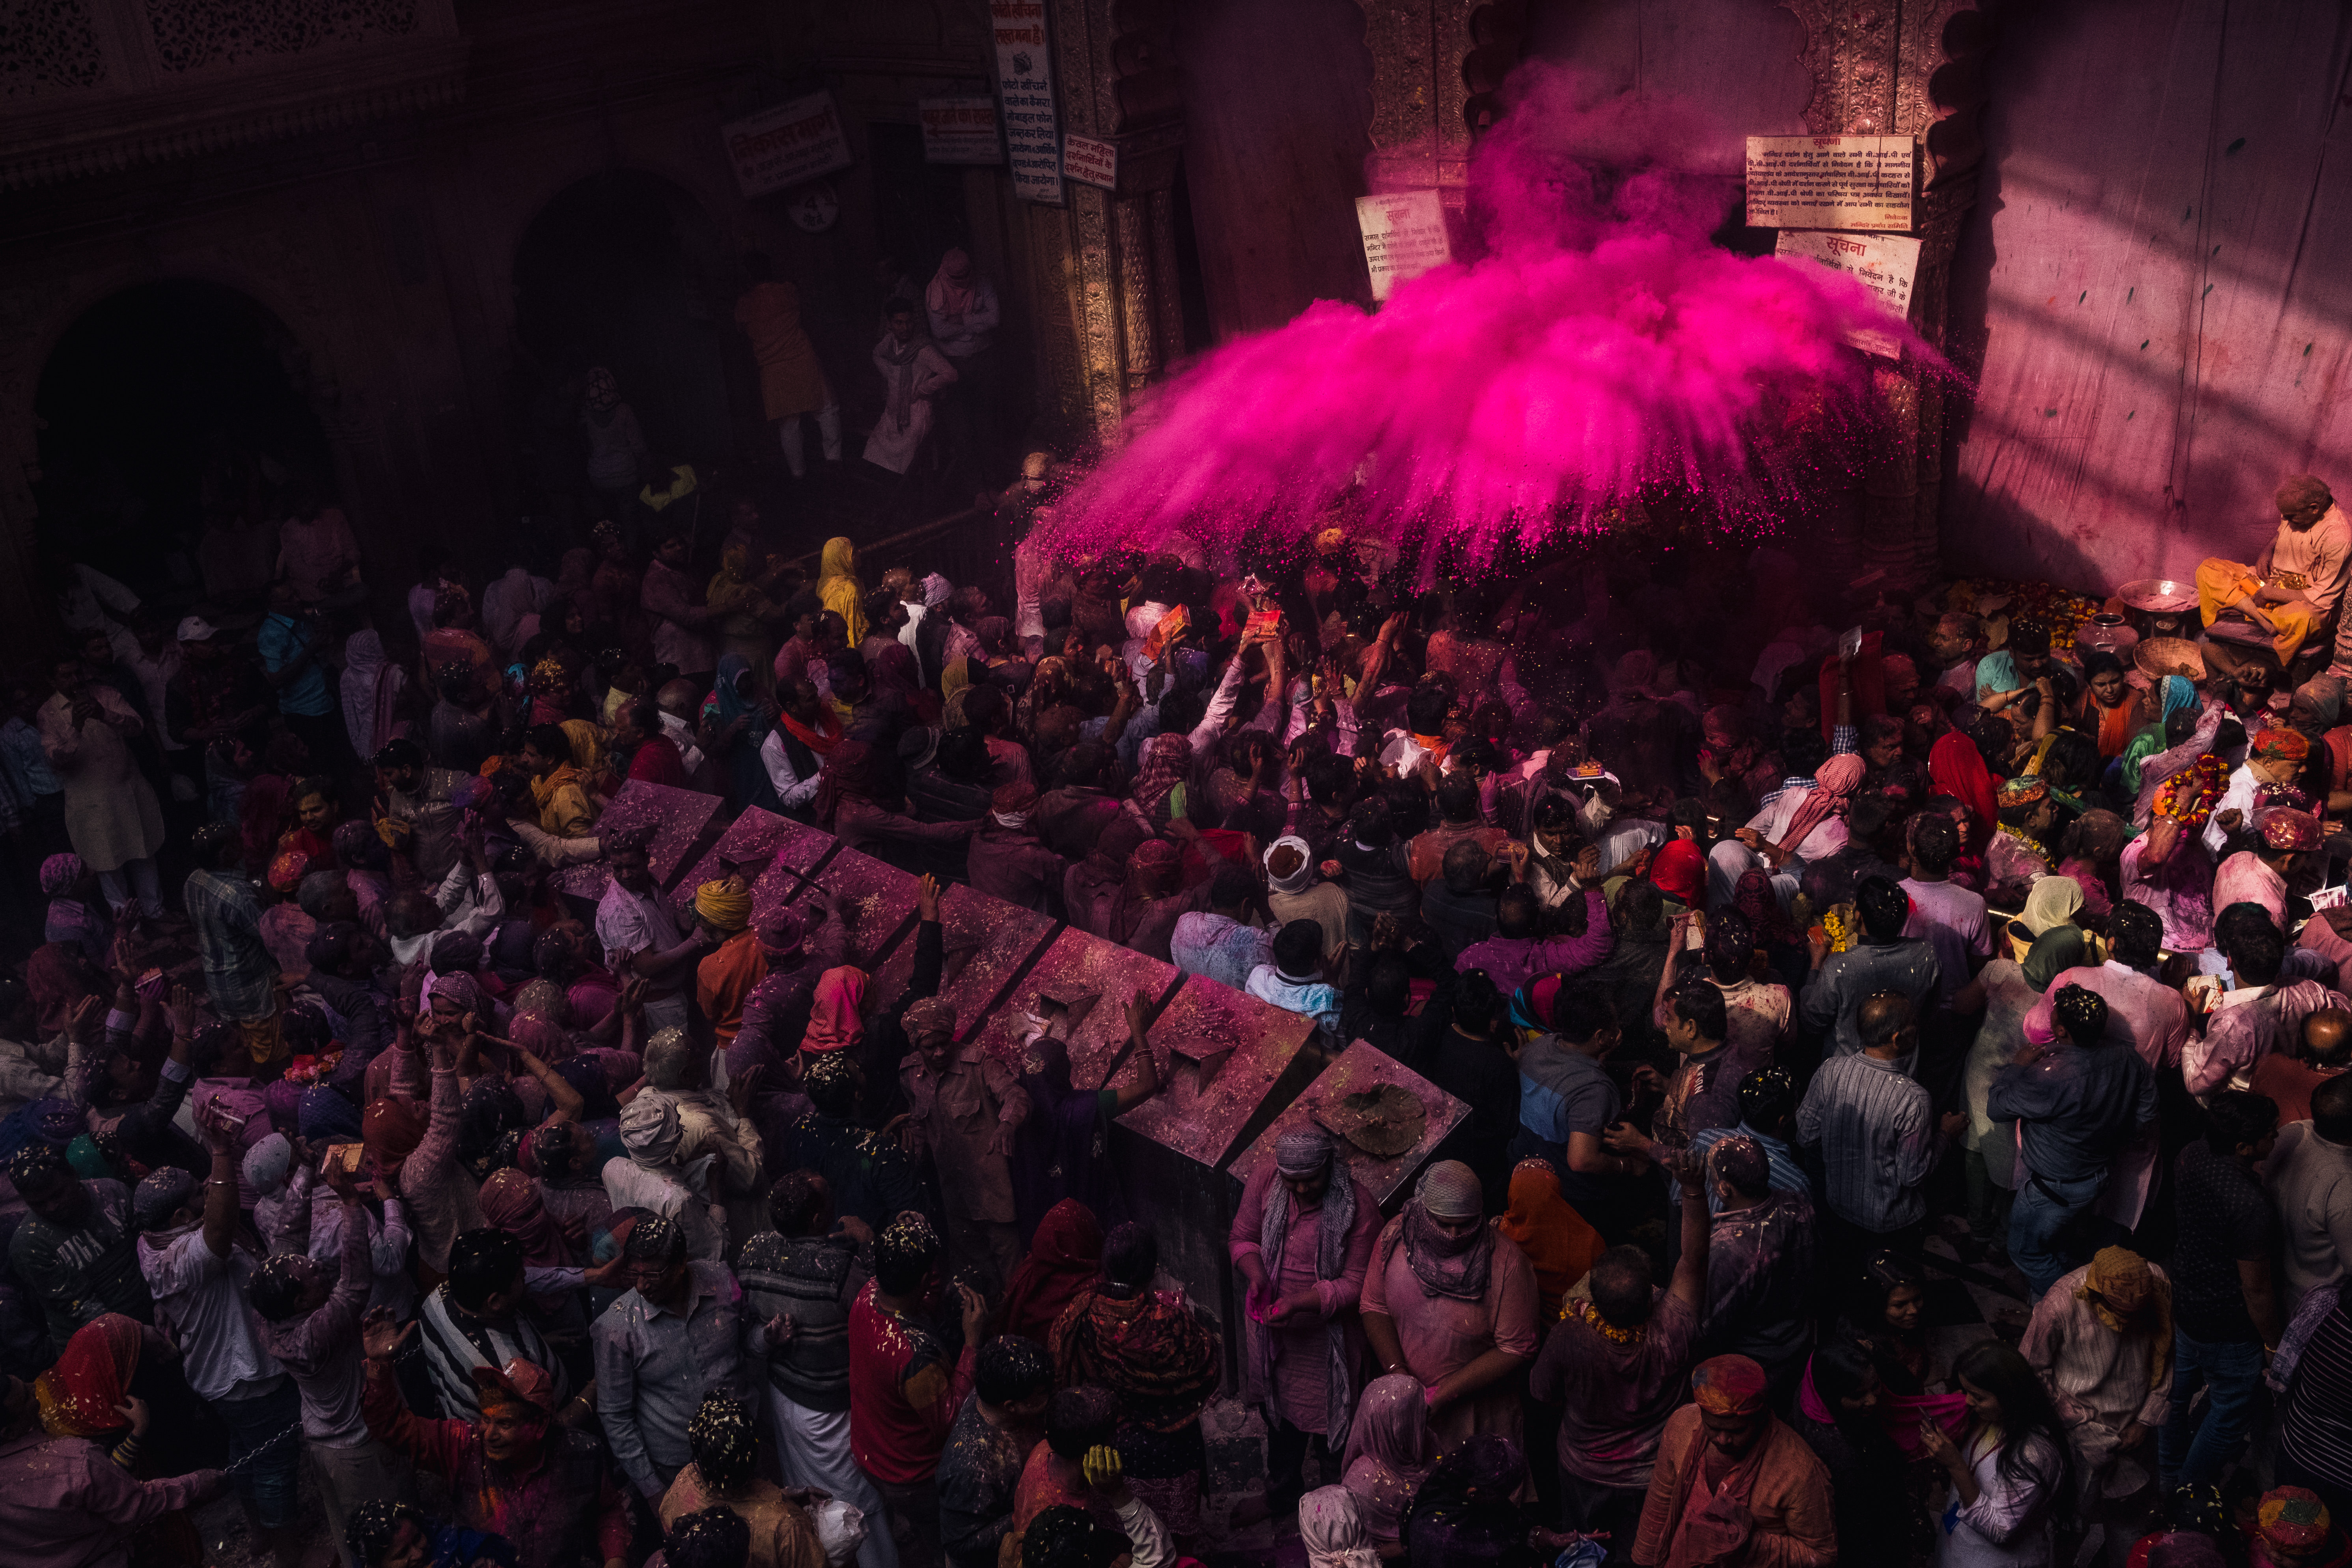 India Street Photography During Holi Festival. pink powder thrown on the crowd. Images by Jason Vinson